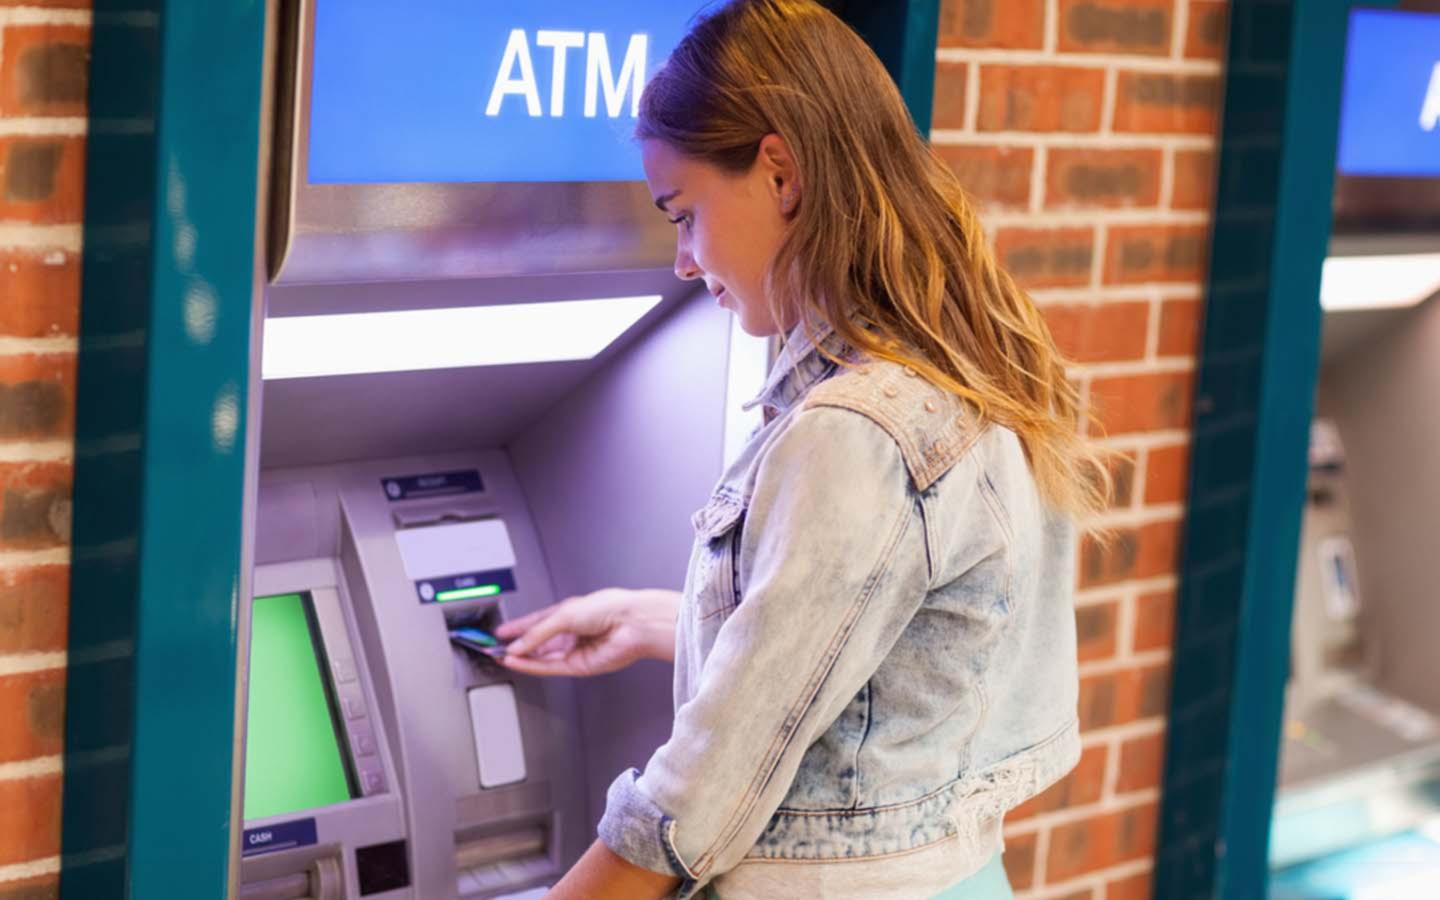 woman using ATM